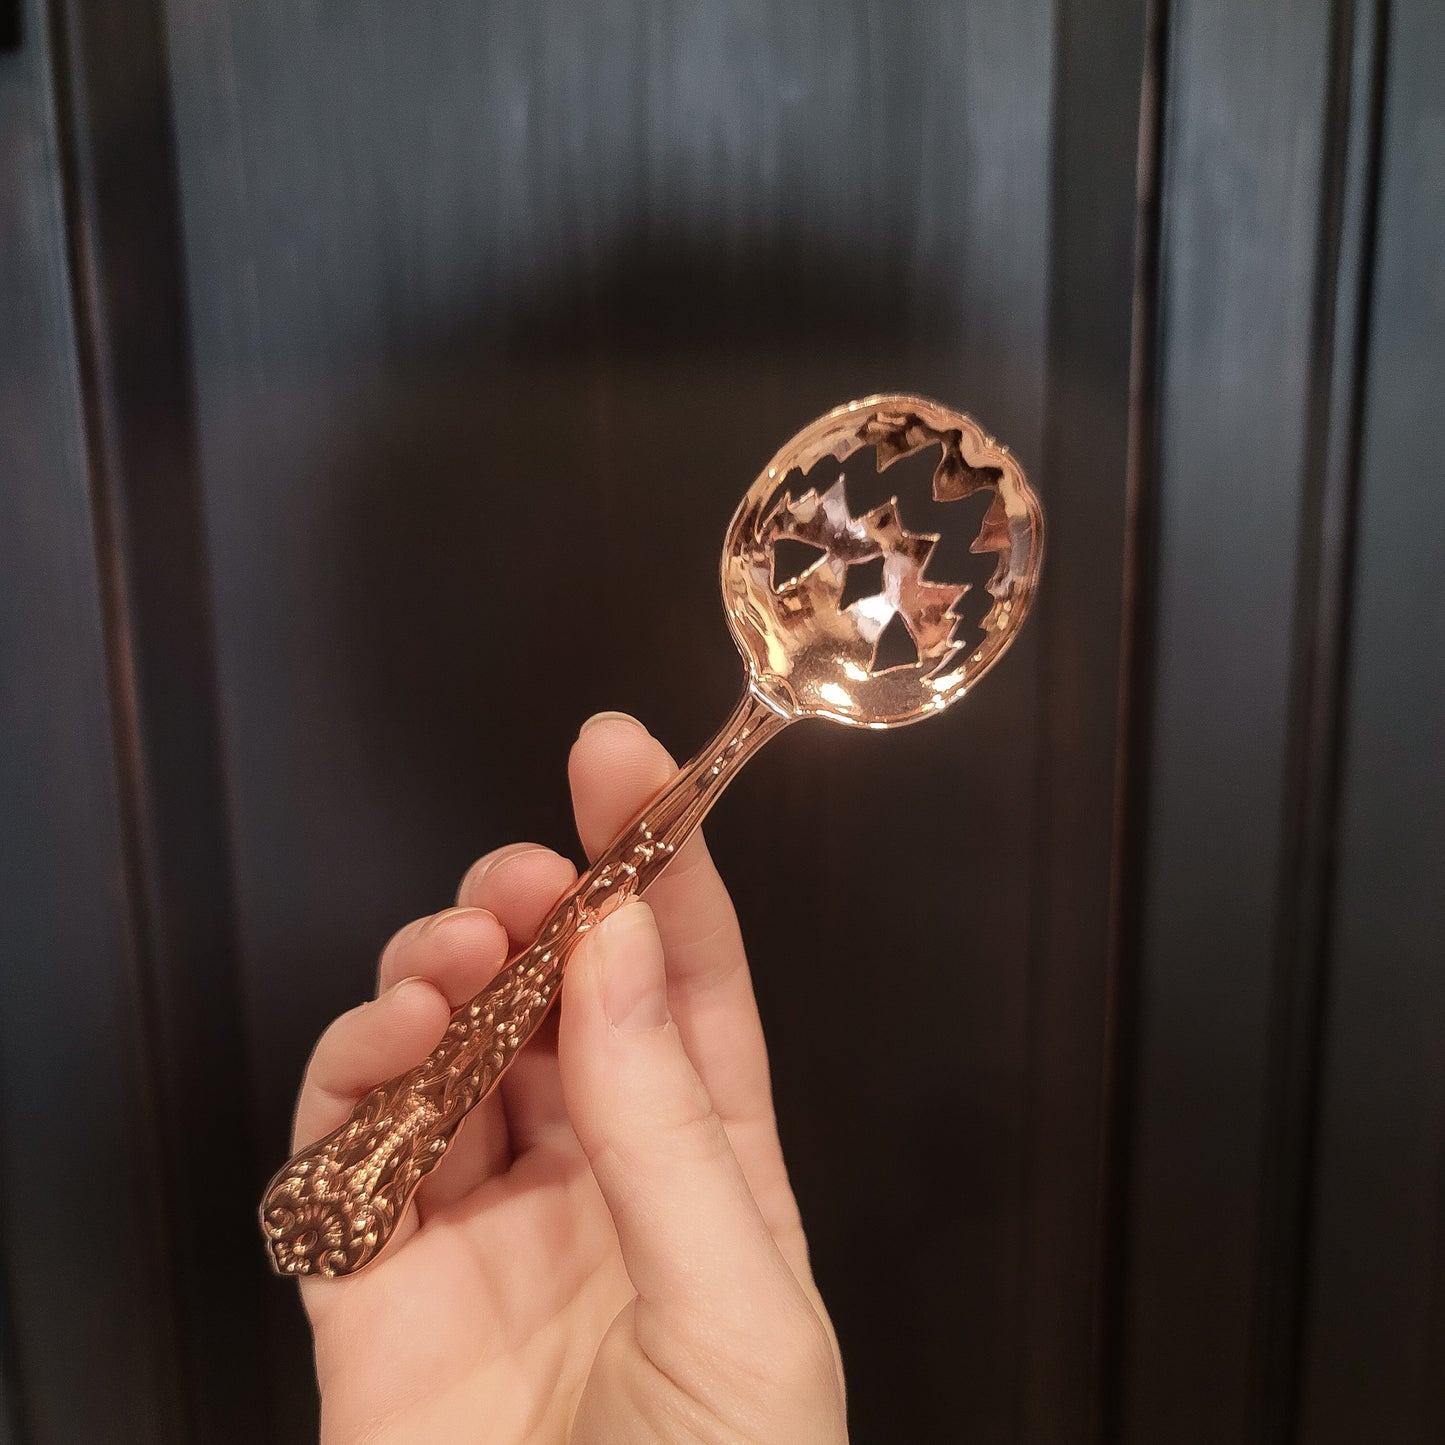 Haunted Hollows Spoon